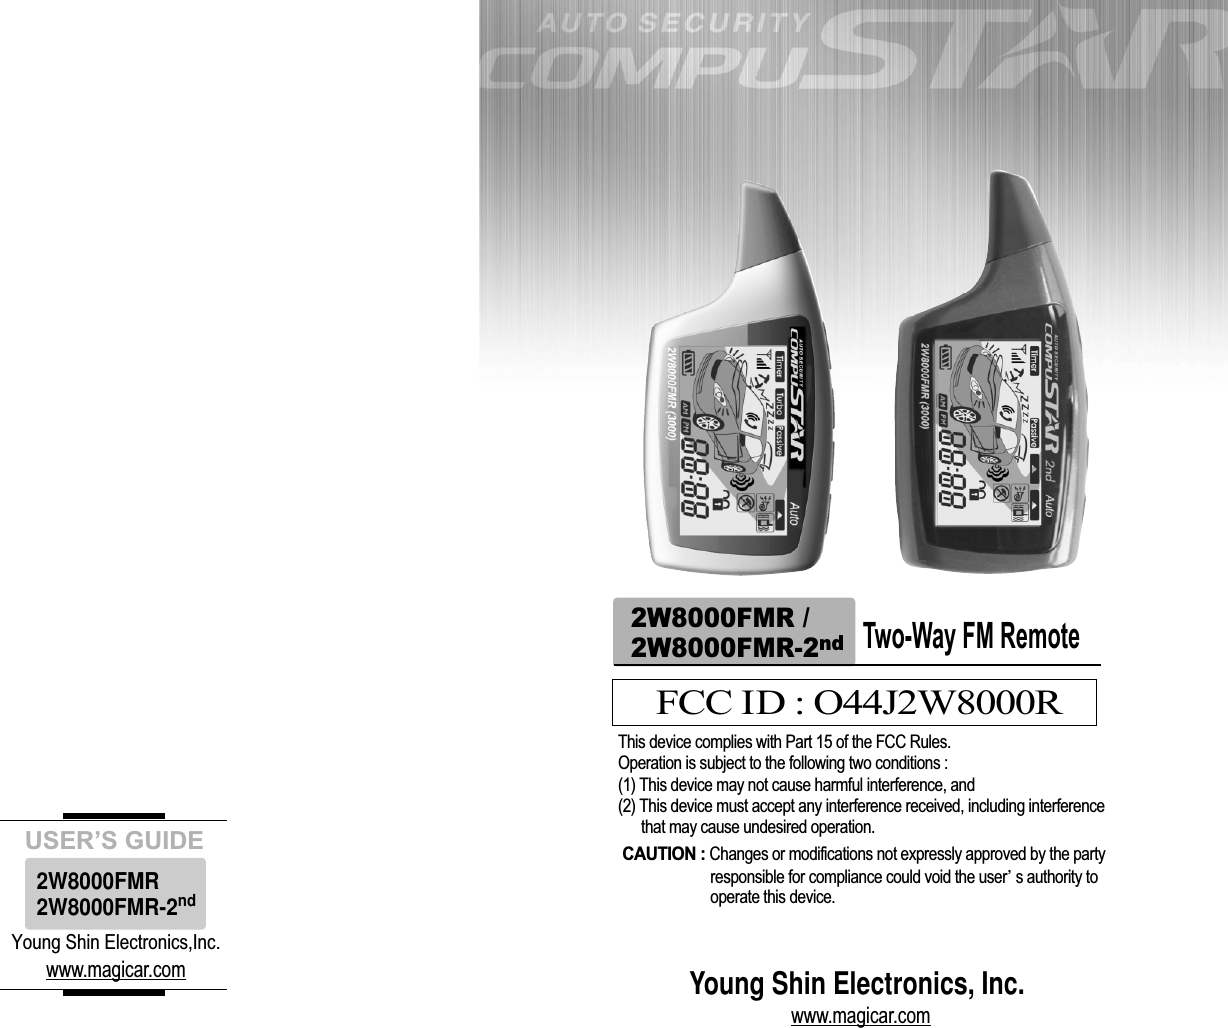 Young Shin Electronics,Inc.www.magicar.comUSER’S GUIDE2W8000FMR2W8000FMR-2ndYoung Shin Electronics, Inc.www.magicar.comTwo-Way FM Remote2W8000FMR /2W8000FMR-2ndFCC ID : O44J2W8000RThis device complies with Part 15 of the FCC Rules. Operation is subject to the following two conditions : (1) This device may not cause harmful interference, and(2) This device must accept any interference received, including interference that may cause undesired operation. CAUTION : Changes or modifications not expressly approved by the party responsible for compliance could void the user s authority to operate this device. 